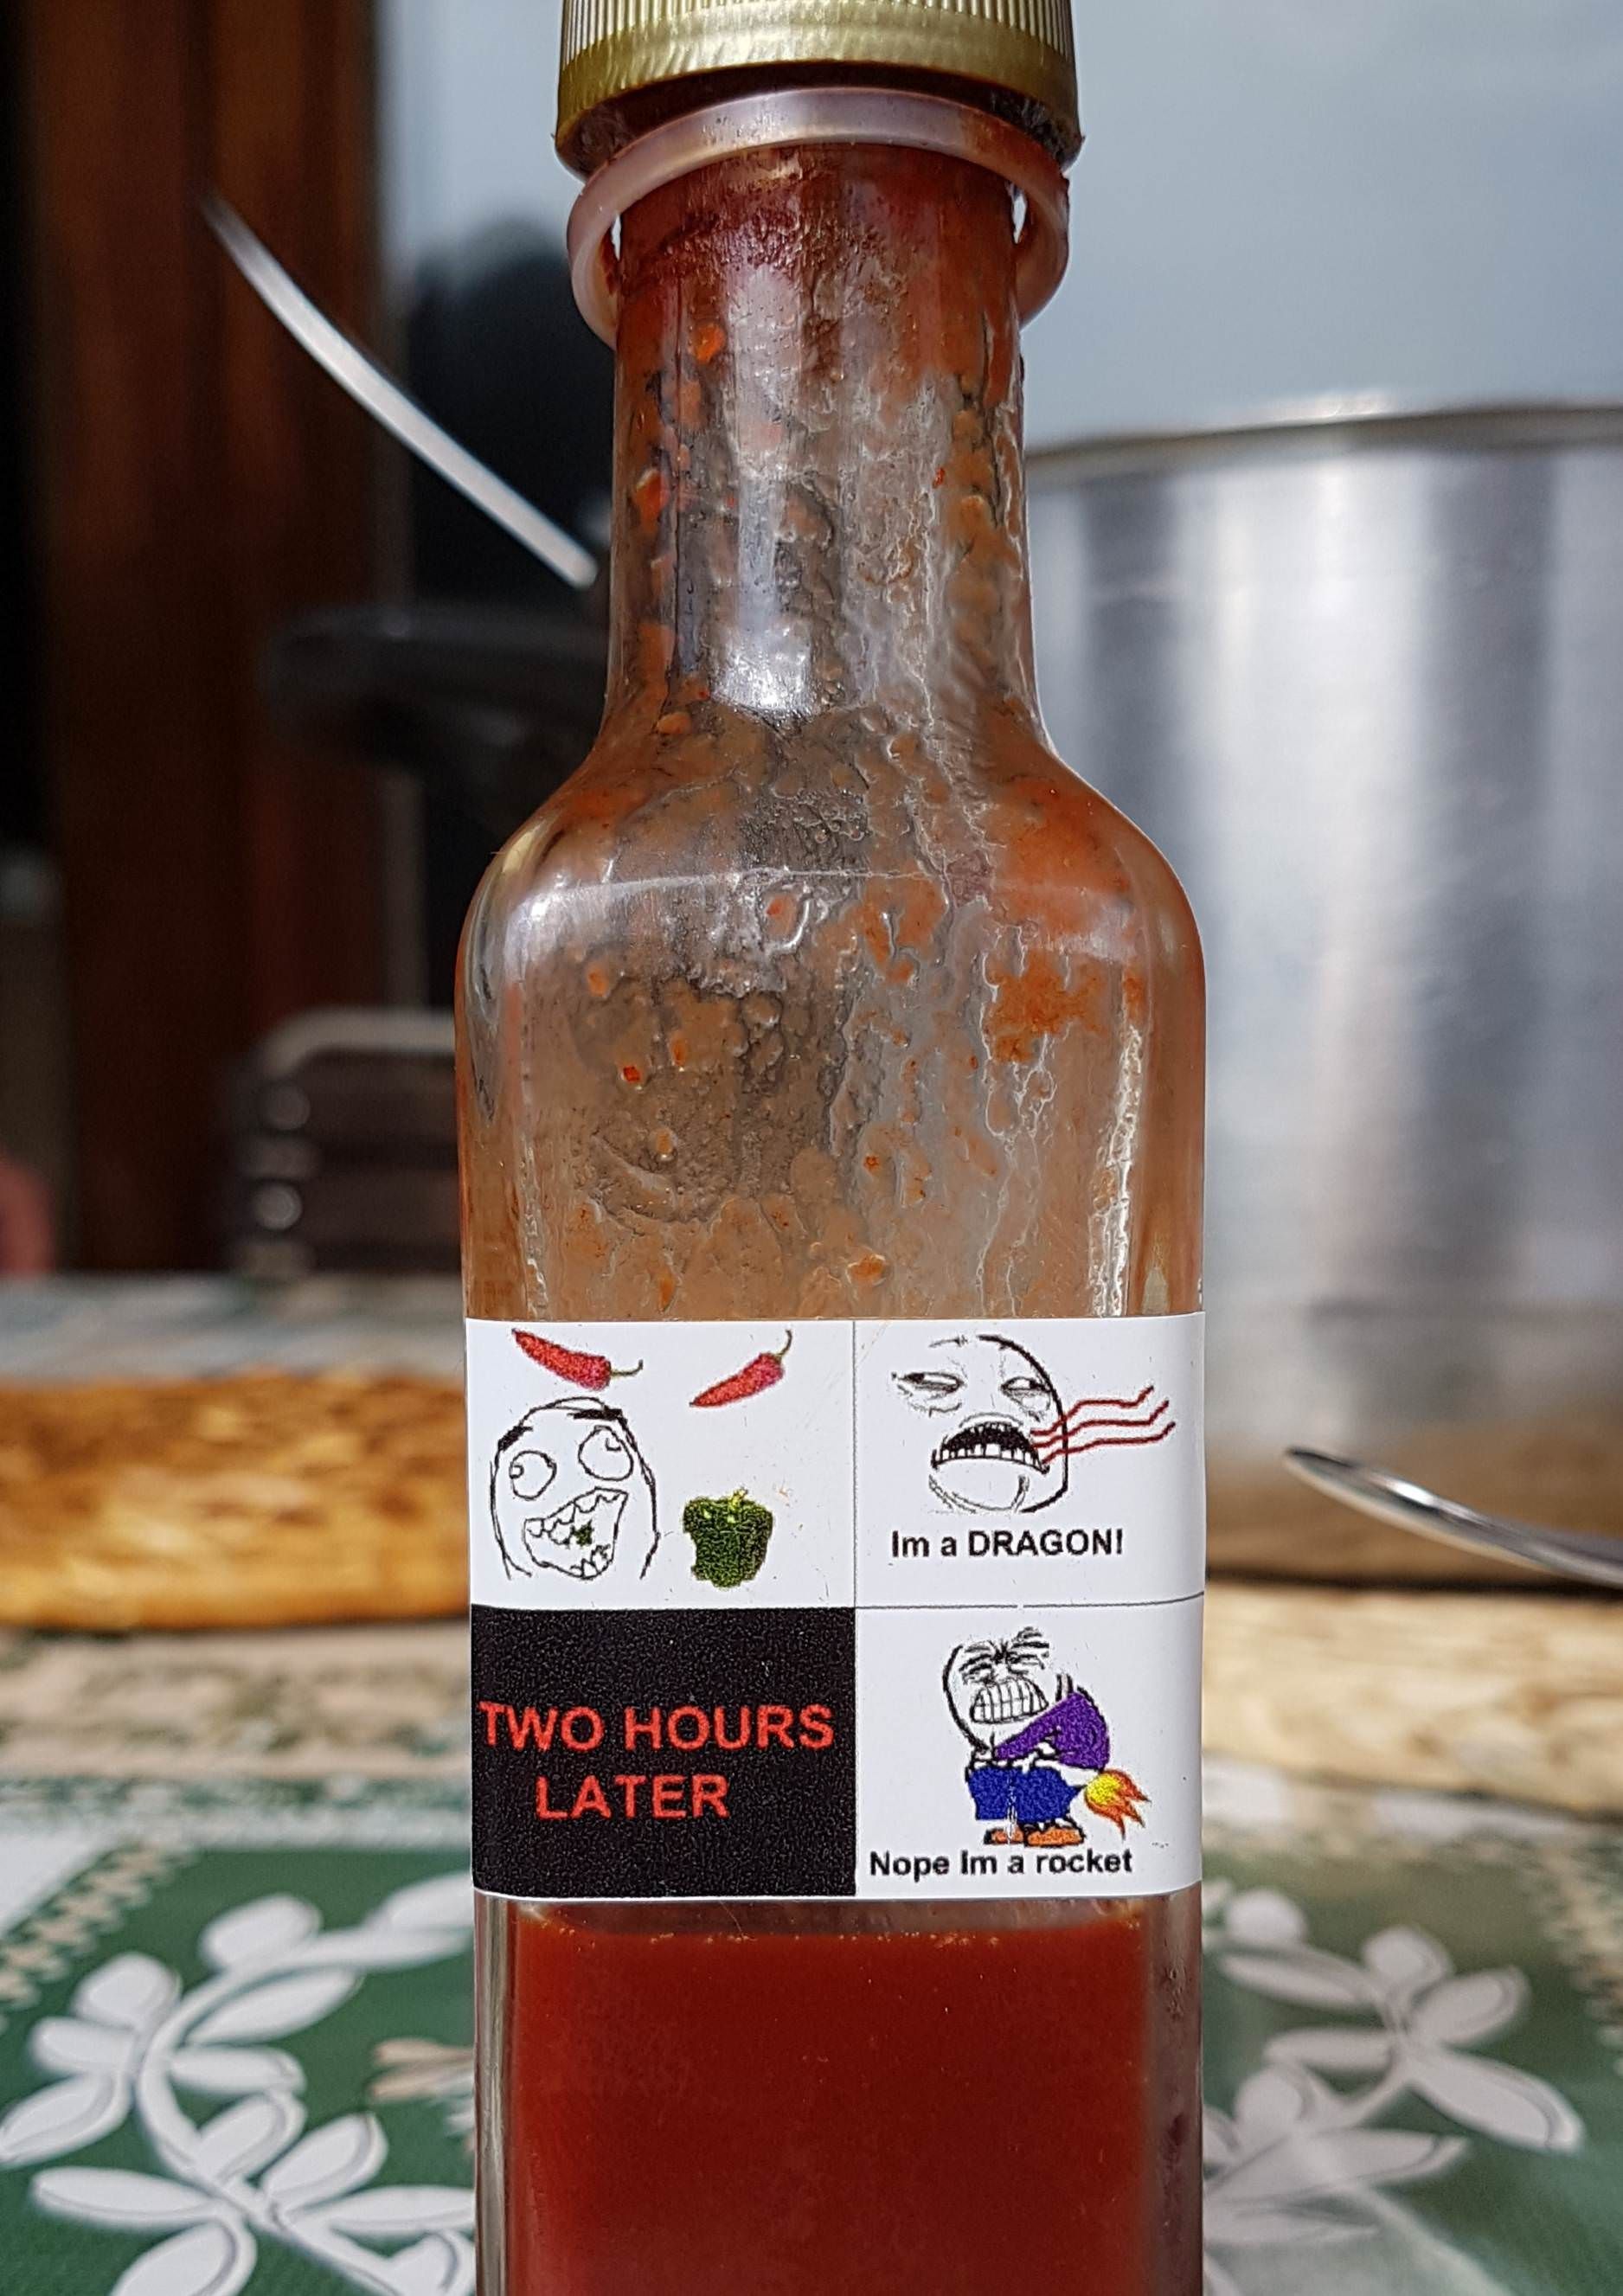 My dad made a hot sauce and this is how he labeled it!